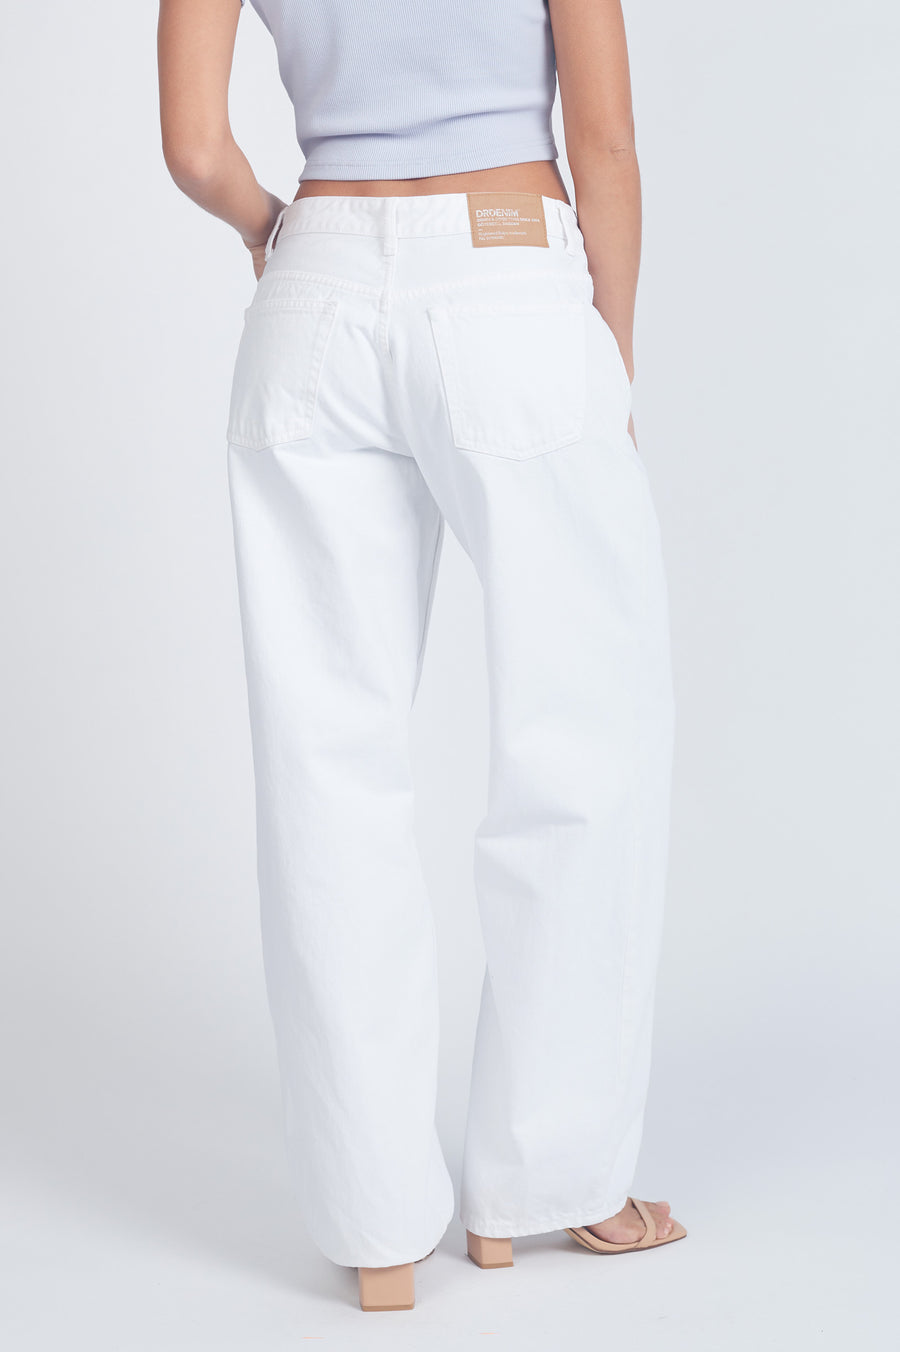 Hill Low Jeans - White